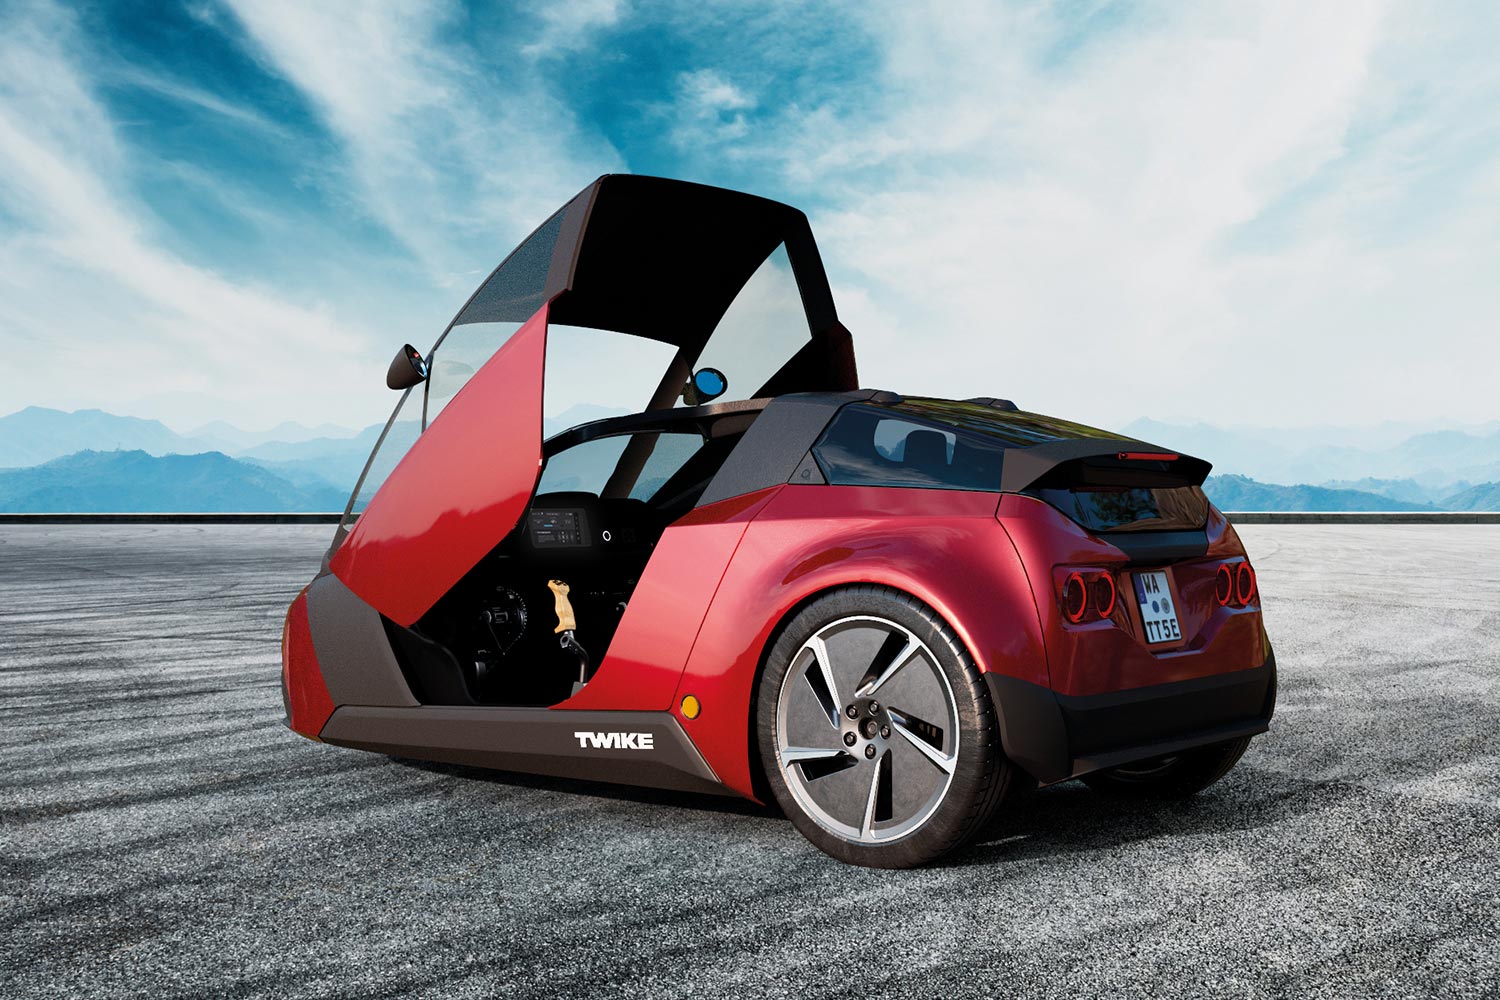 Twike 5, an electric vehicle with three wheels